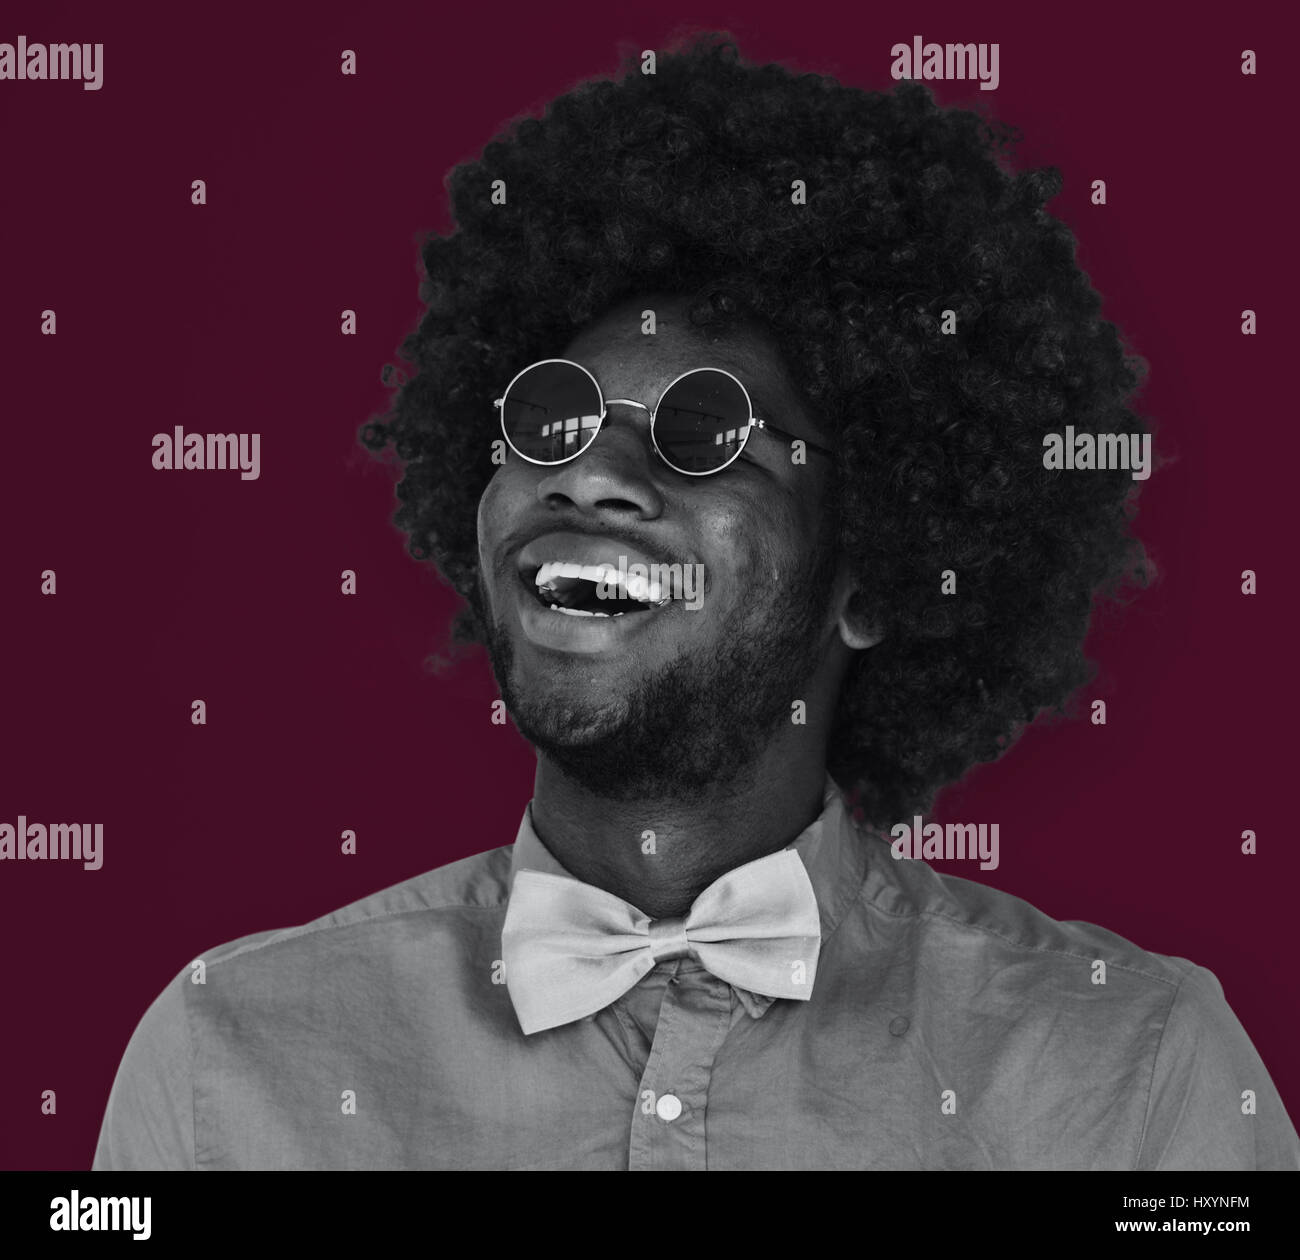 A Guy with a Black Afro Wig Smiling Stock Photo